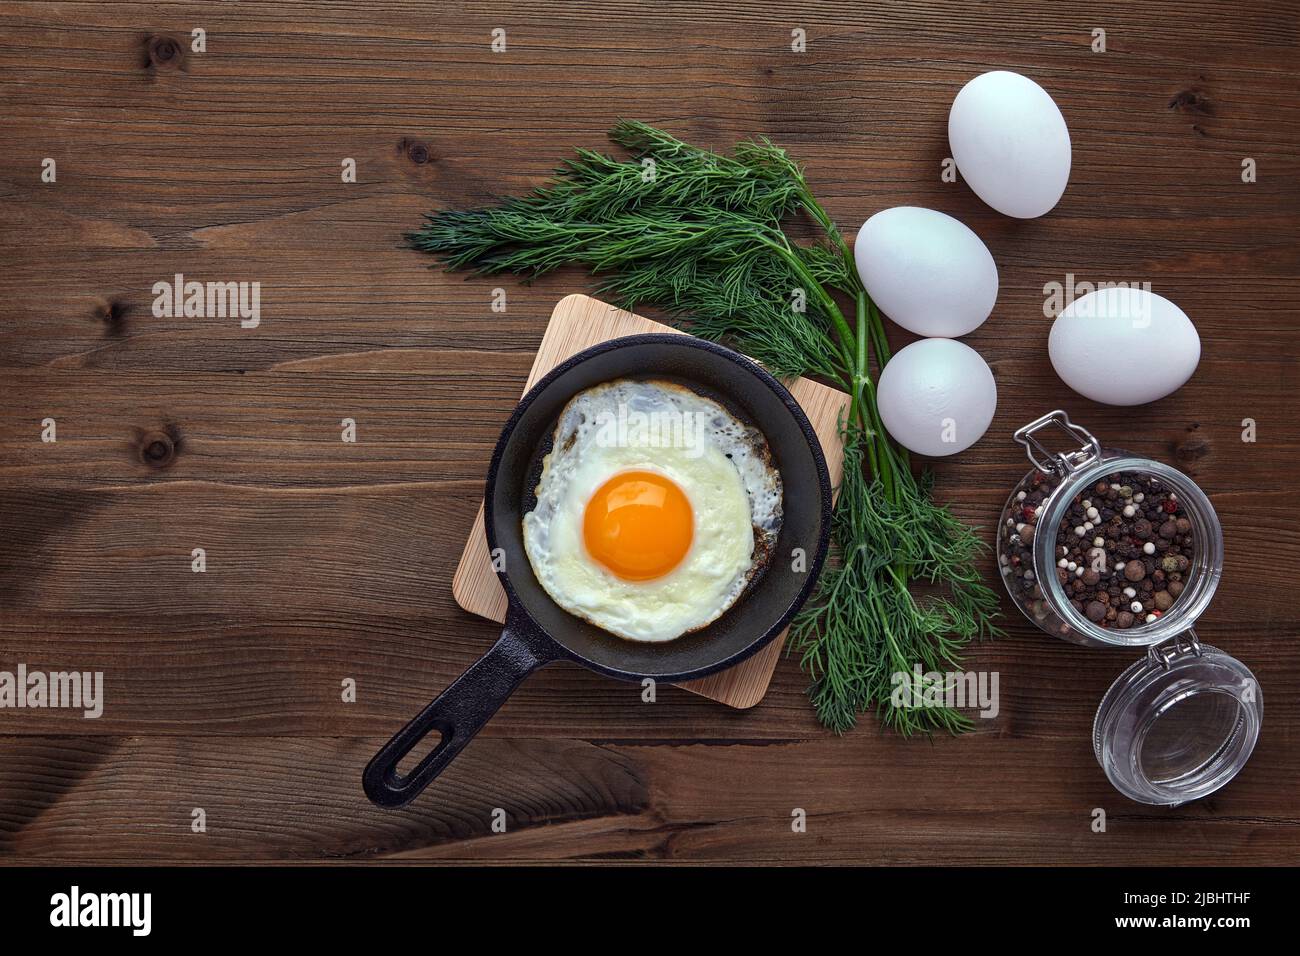 https://c8.alamy.com/comp/2JBHTHF/fried-egg-in-a-small-skillet-with-a-stand-a-bunch-of-dill-a-jar-of-peppercorns-and-whole-white-eggs-on-a-brown-wooden-table-2JBHTHF.jpg